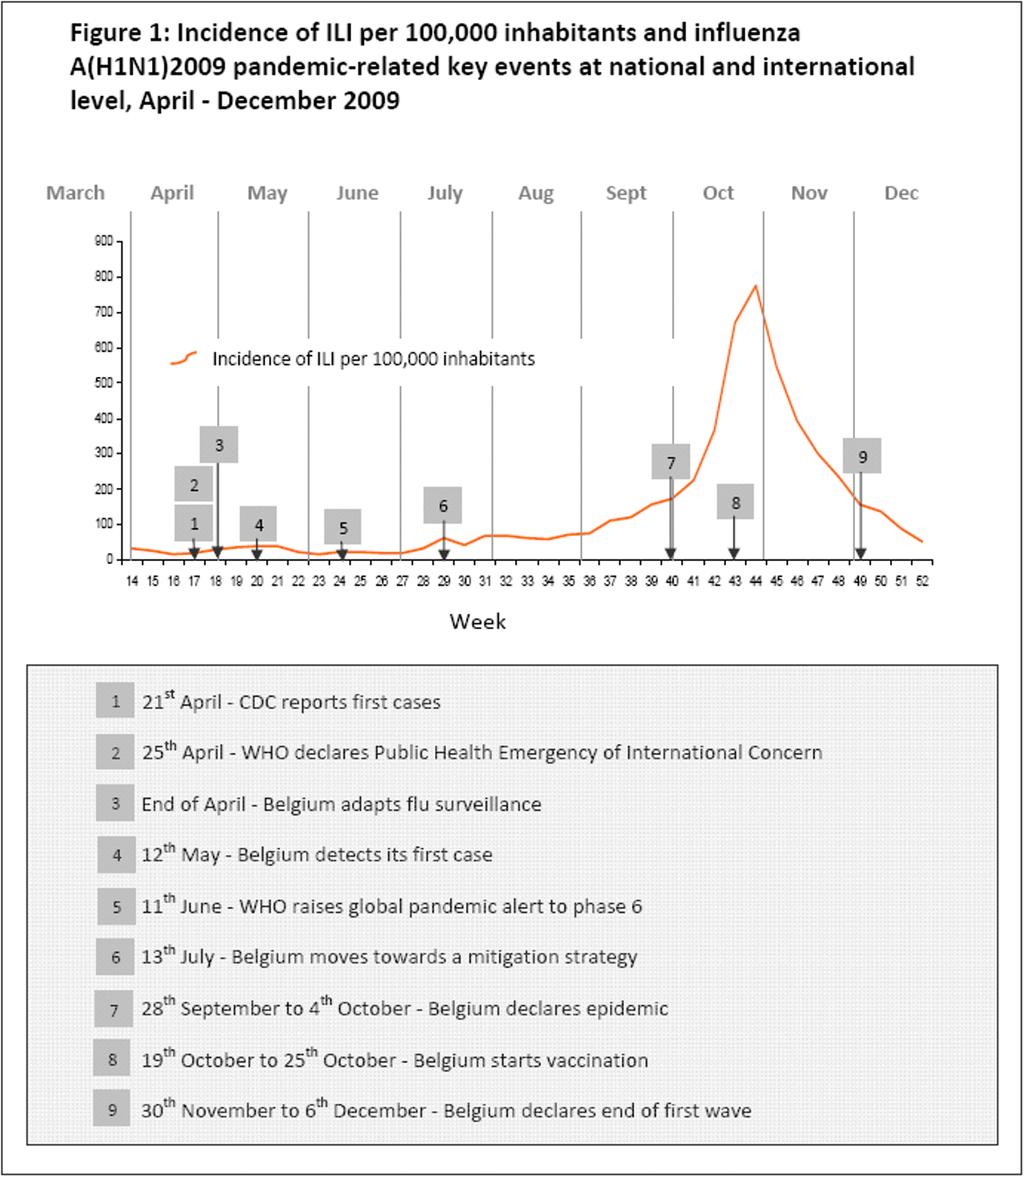 50 Litzroth A, Gutiérrez I, Hammadi S. At the same time systems were developed for a detailed monitoring of the impact of the pandemic on public health and on the health-care system in Belgium.